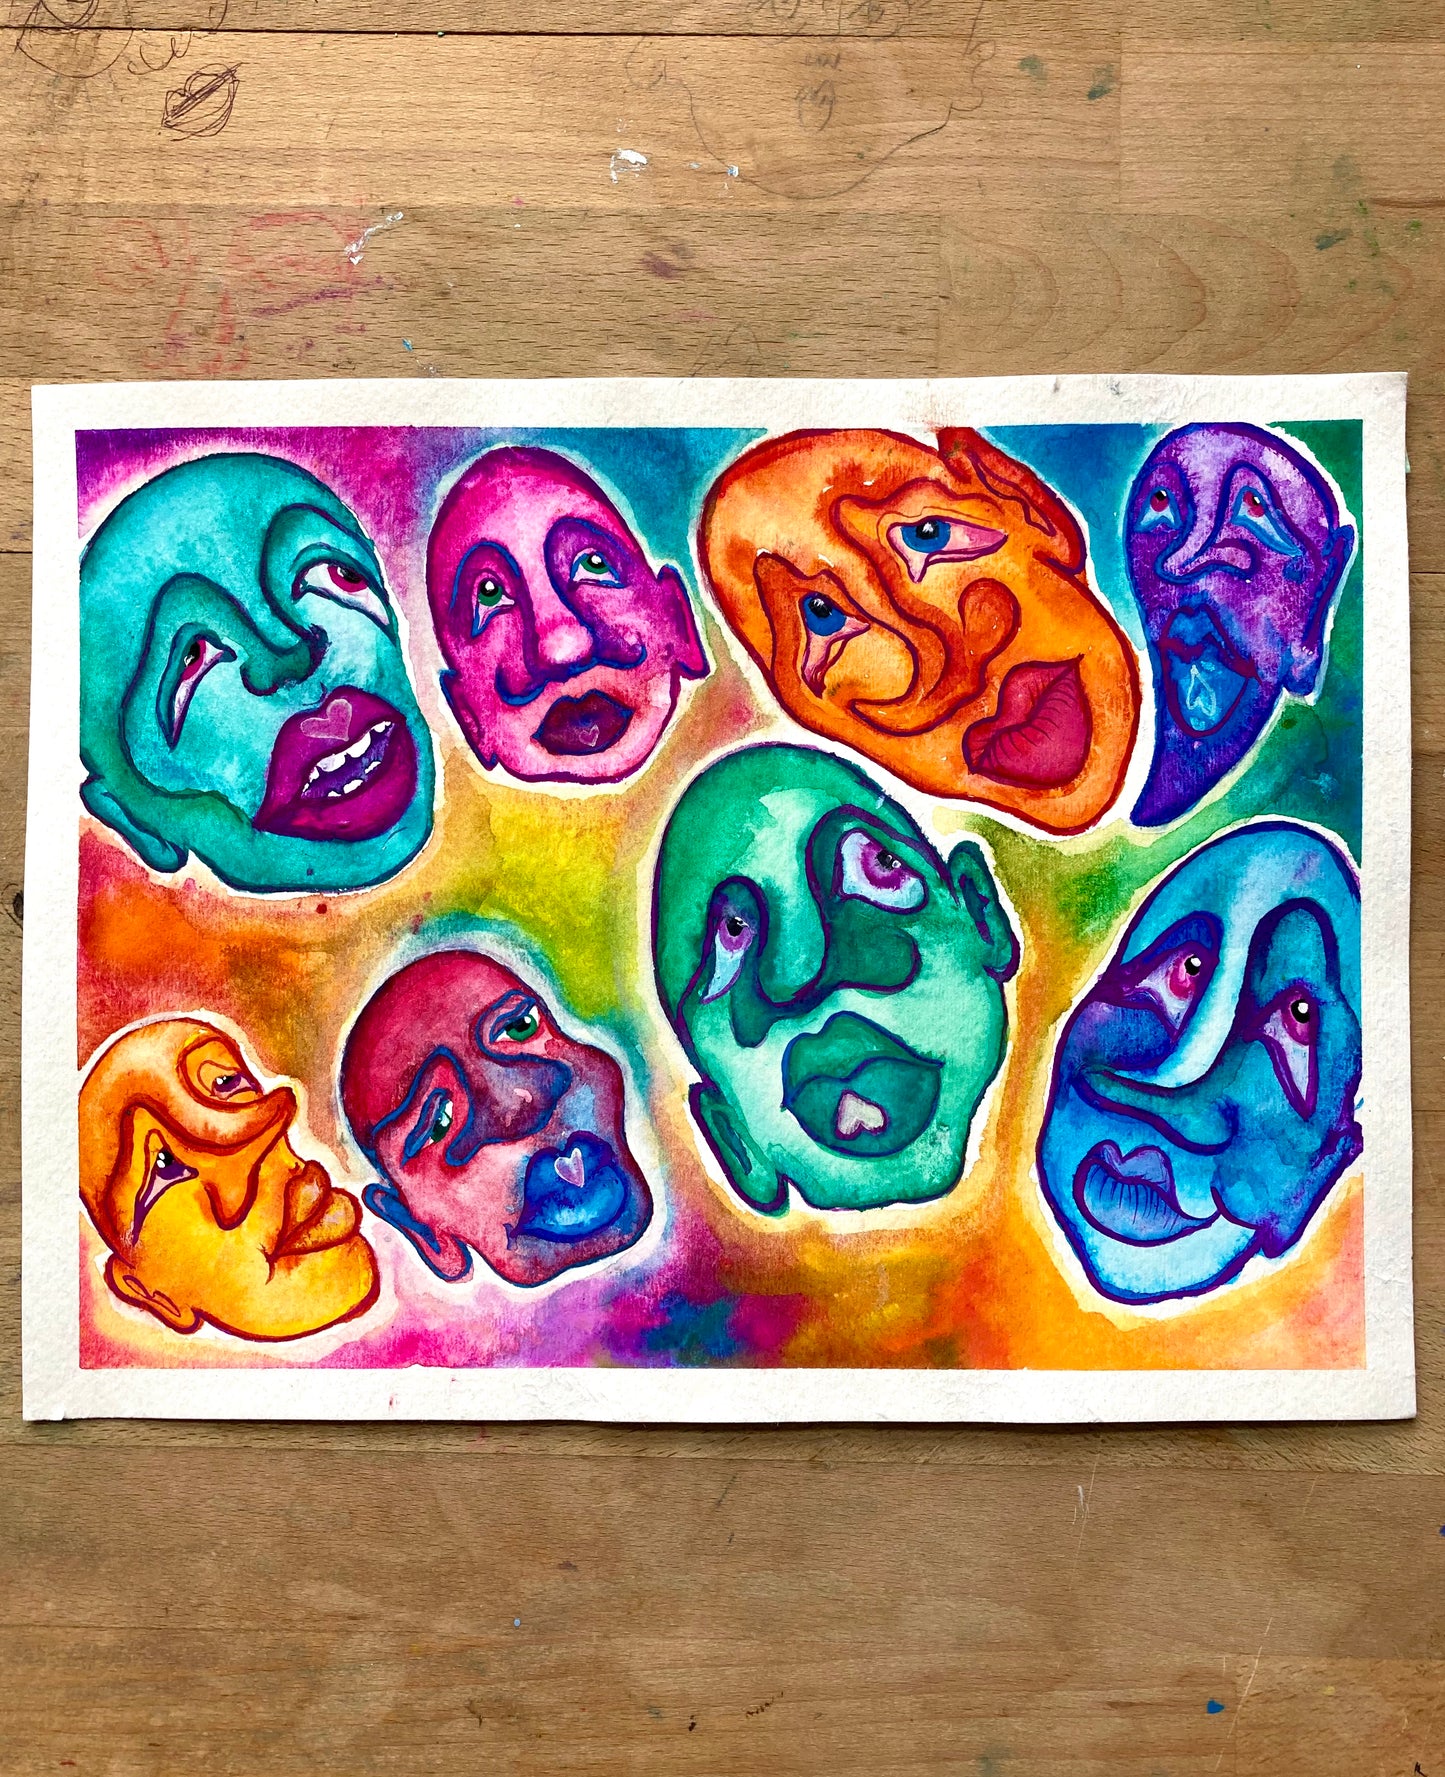 "Floating faces" painting on paper